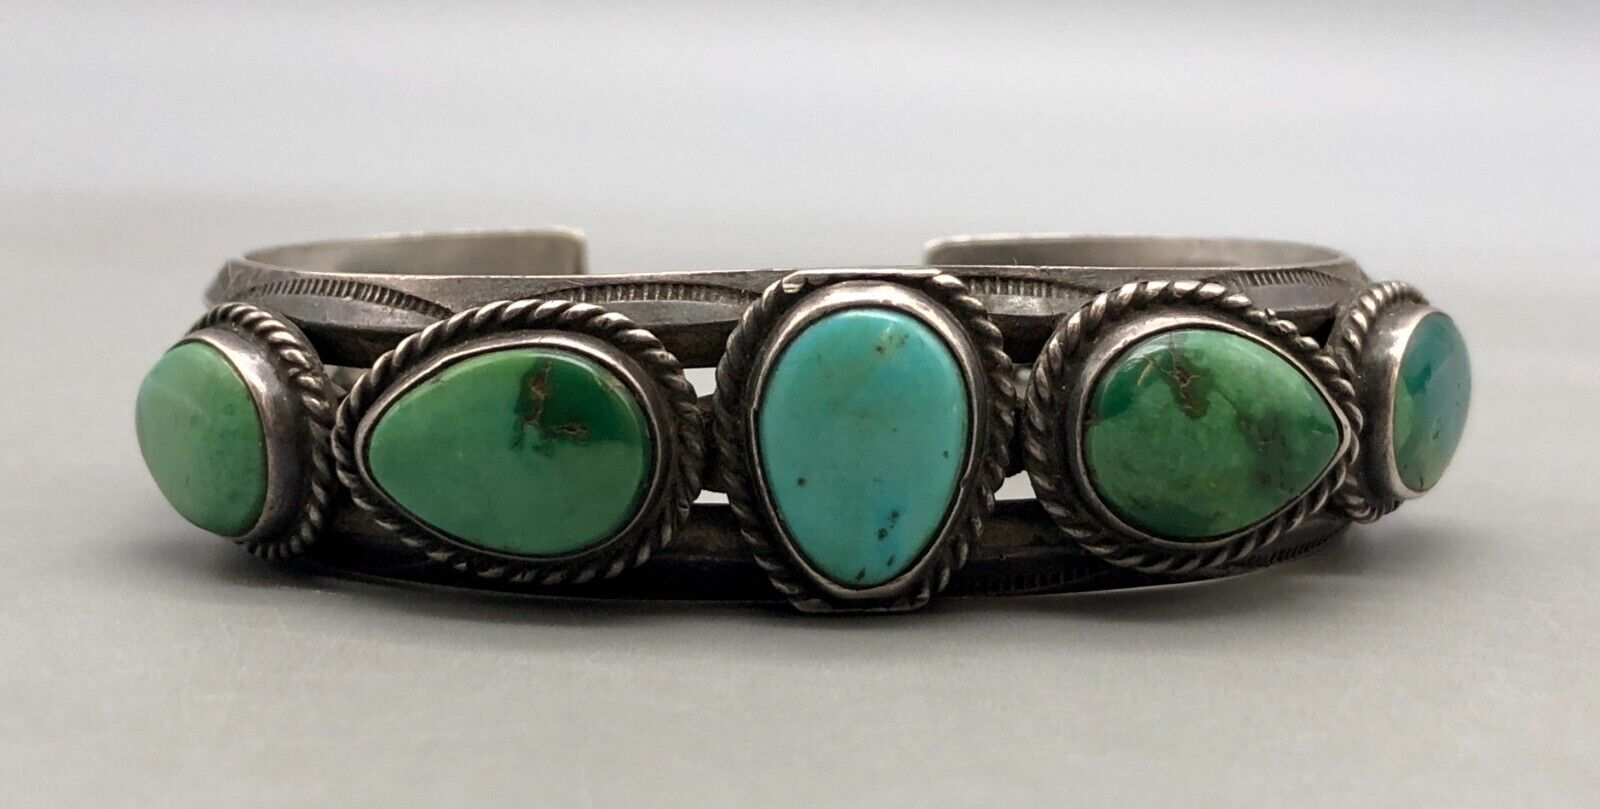 1920s to 1930s Five Stone Turquoise And Sterling Silver Bracelet